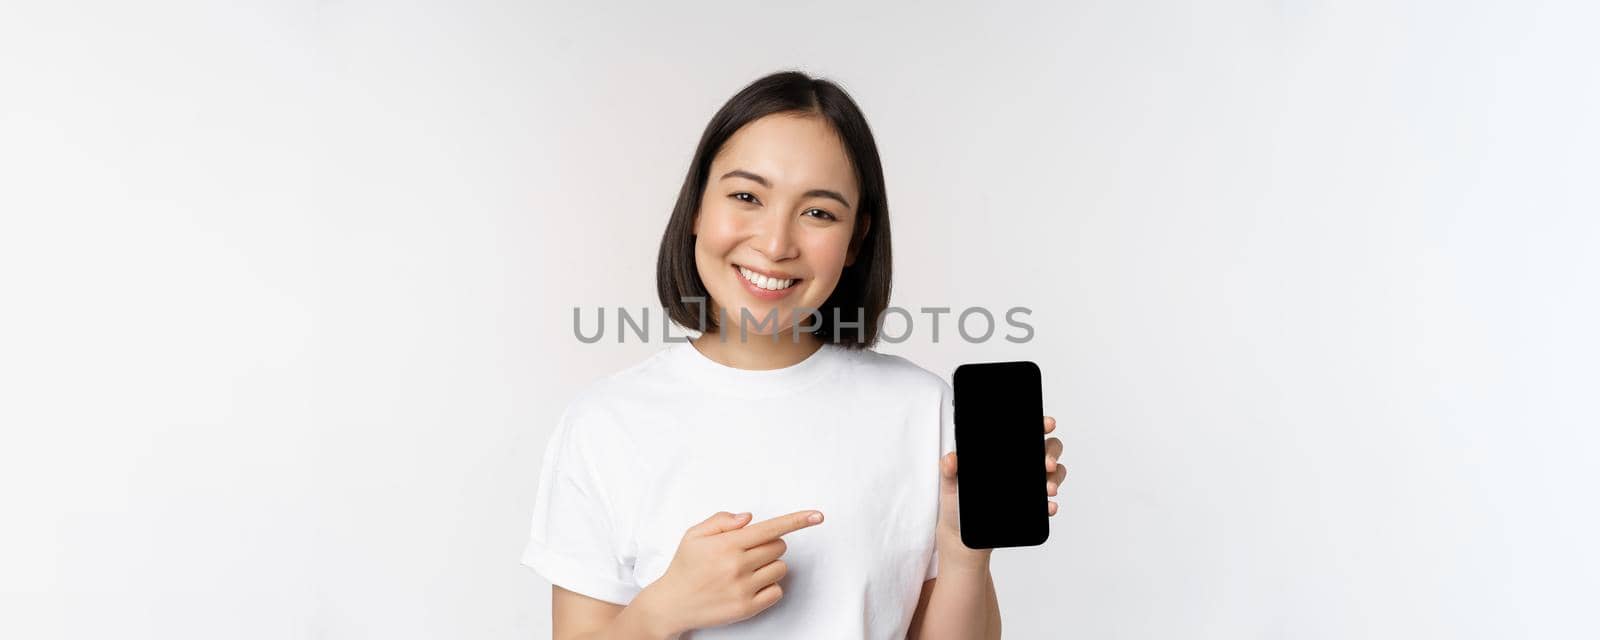 Smiling asian woman pointing finger at smartphone screen, showing application interface, mobile phone website, standing over white background.